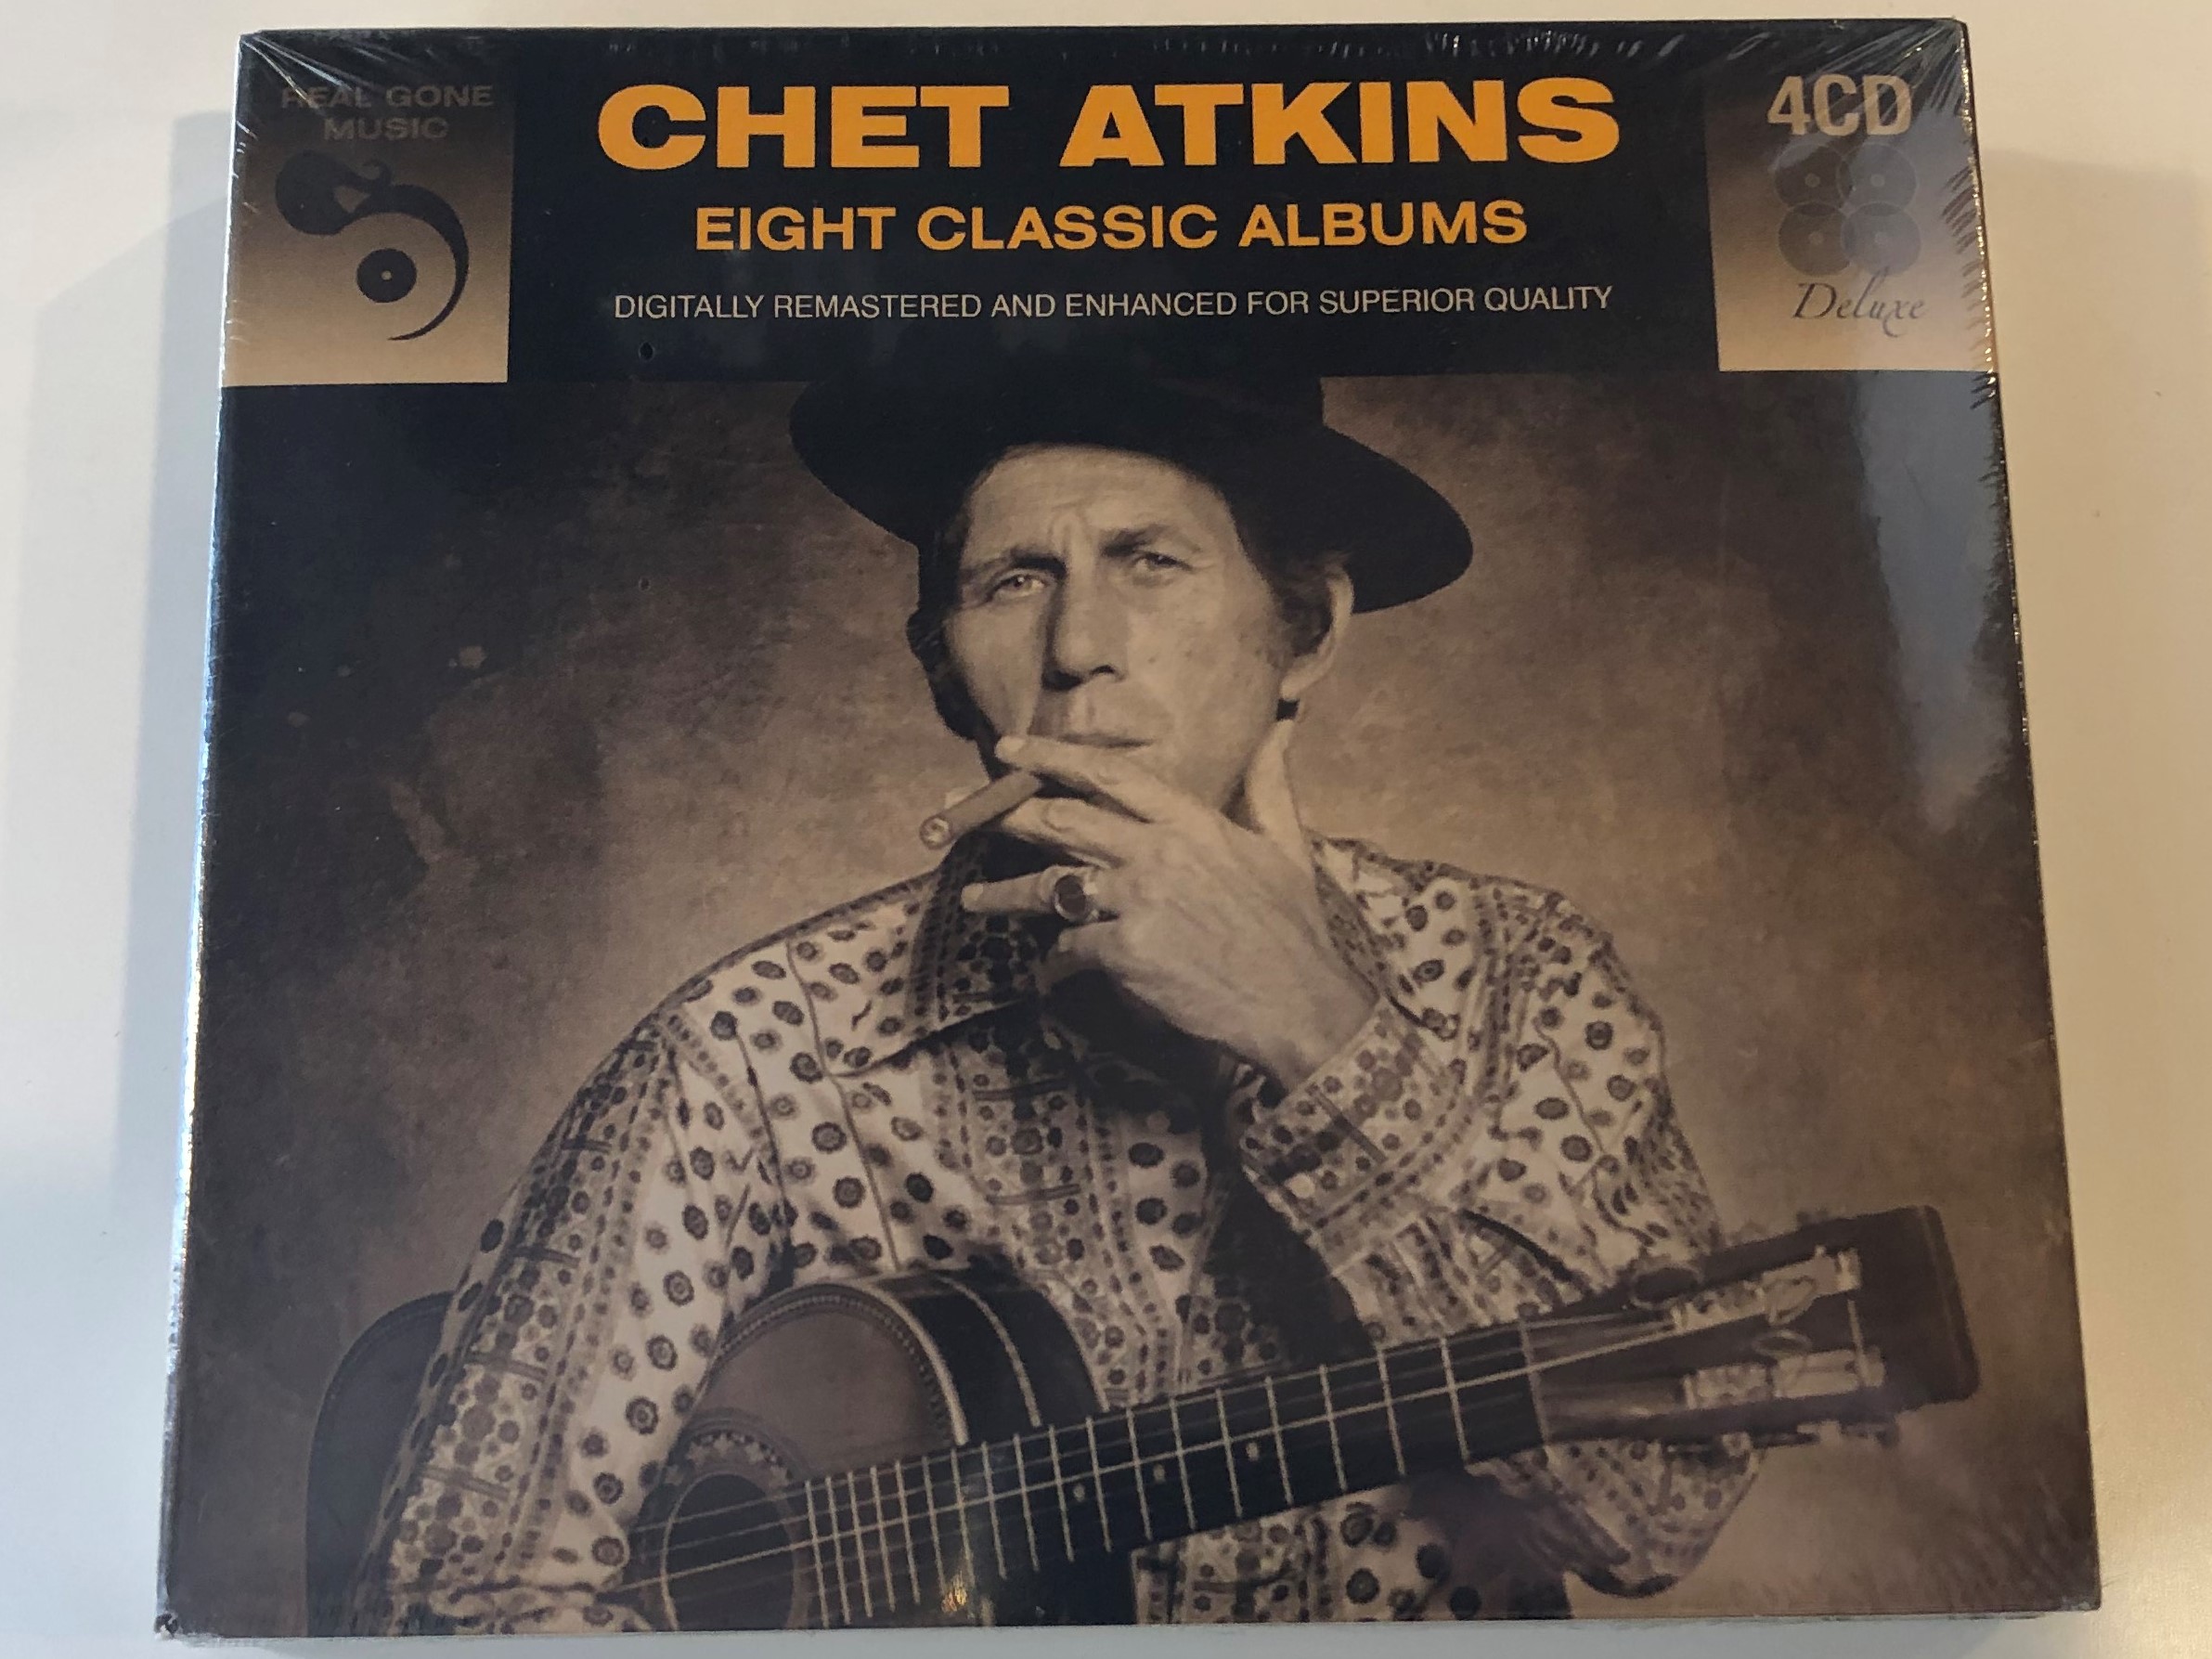 chet-atkins-eight-classic-albums-digitally-remastered-and-enhanced-for-superior-quality-real-gone-4x-audio-cd-rgmcd018-1-.jpg